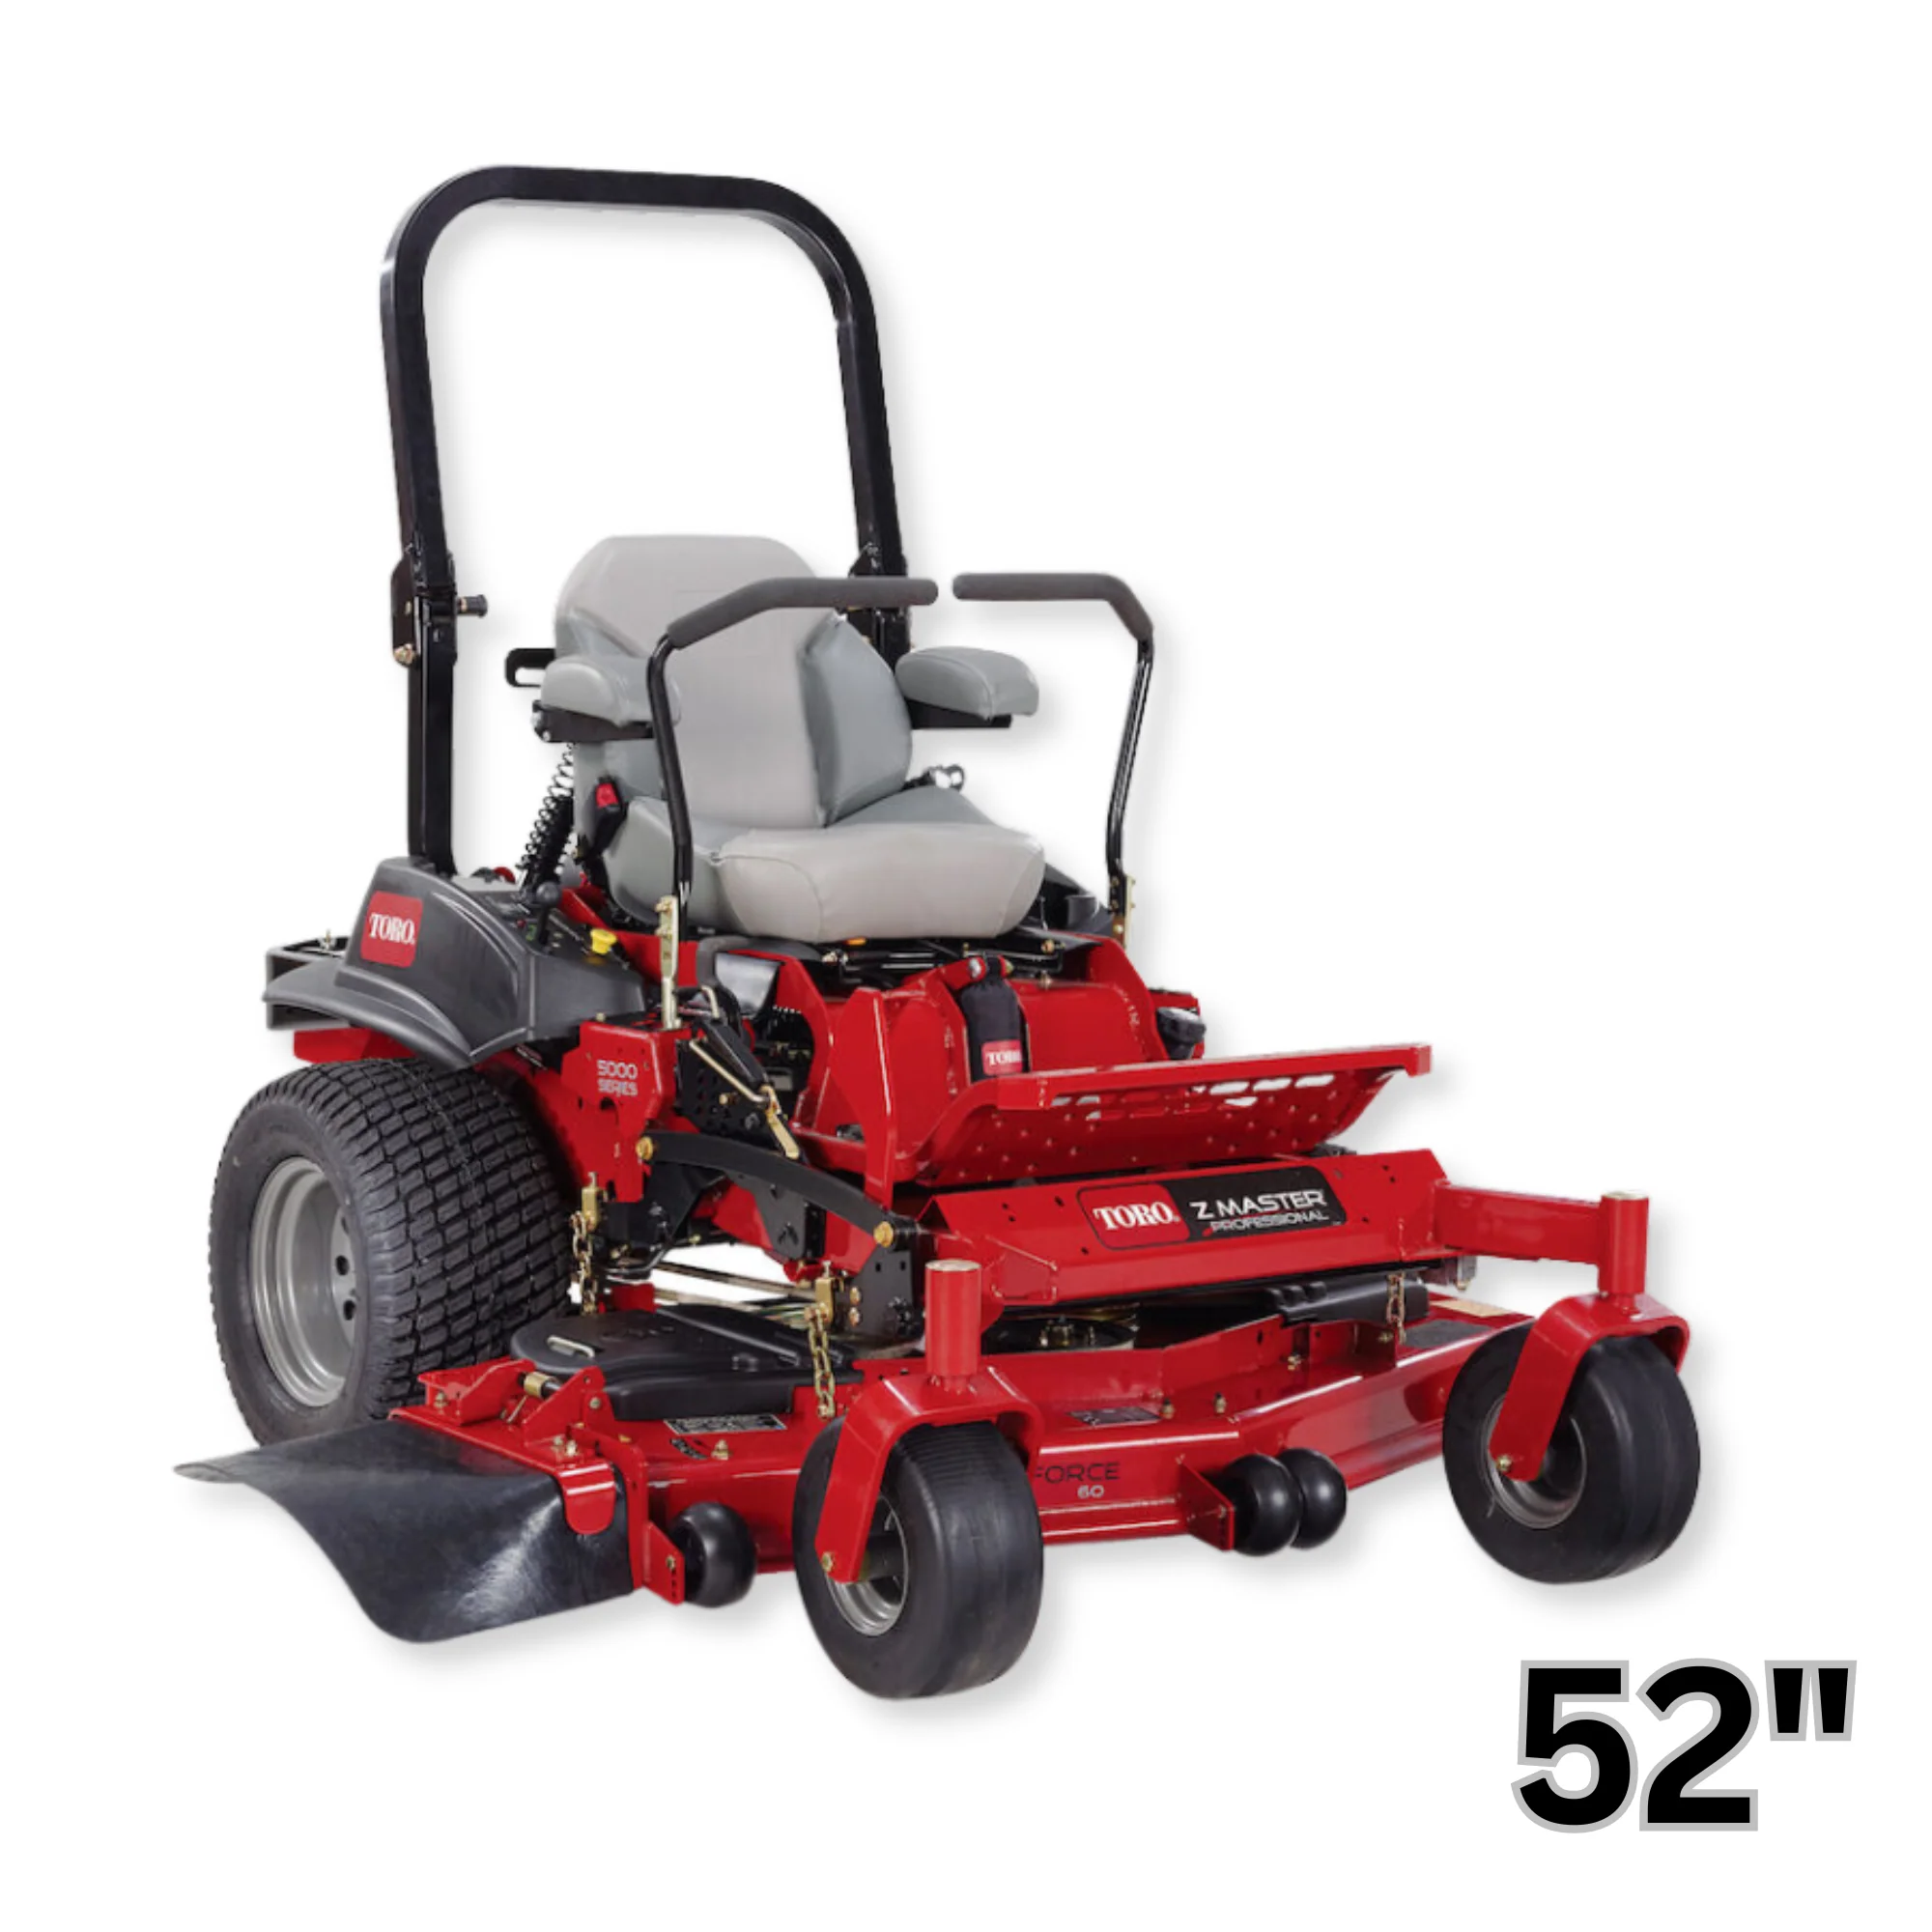 Z Master Professional 5000 Series Riding Mower,